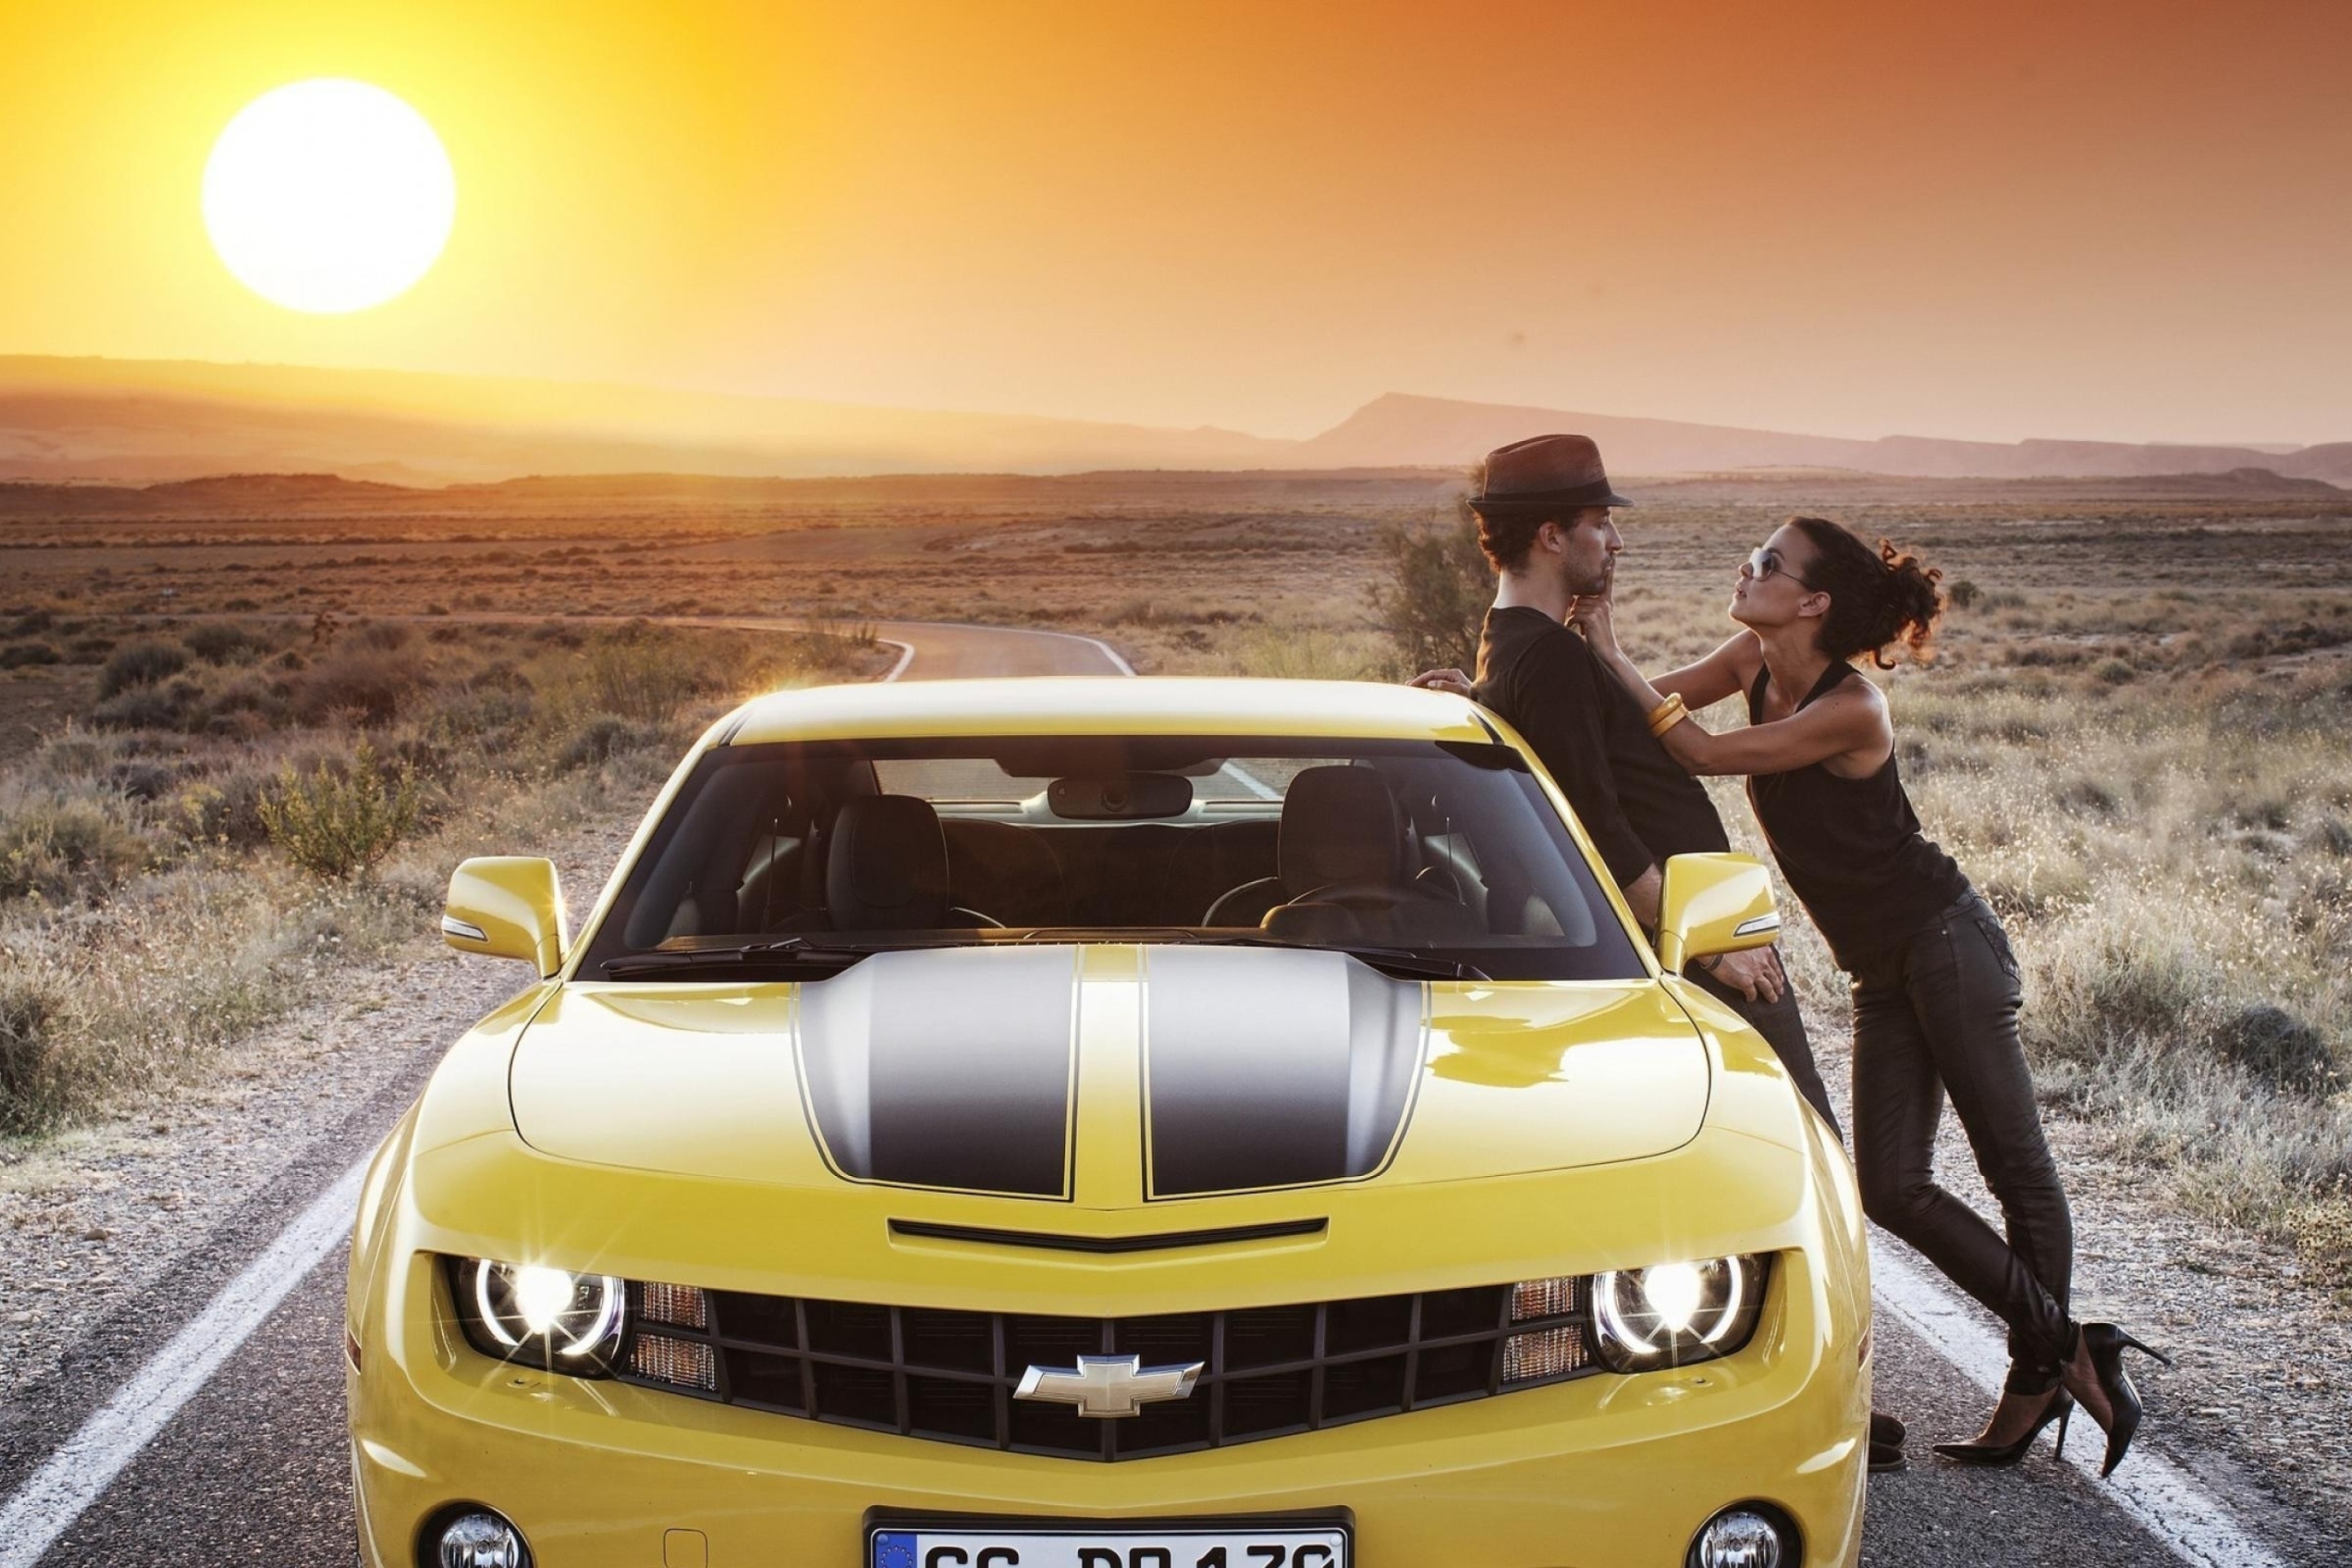 Couple And Yellow Chevrolet wallpaper 2880x1920